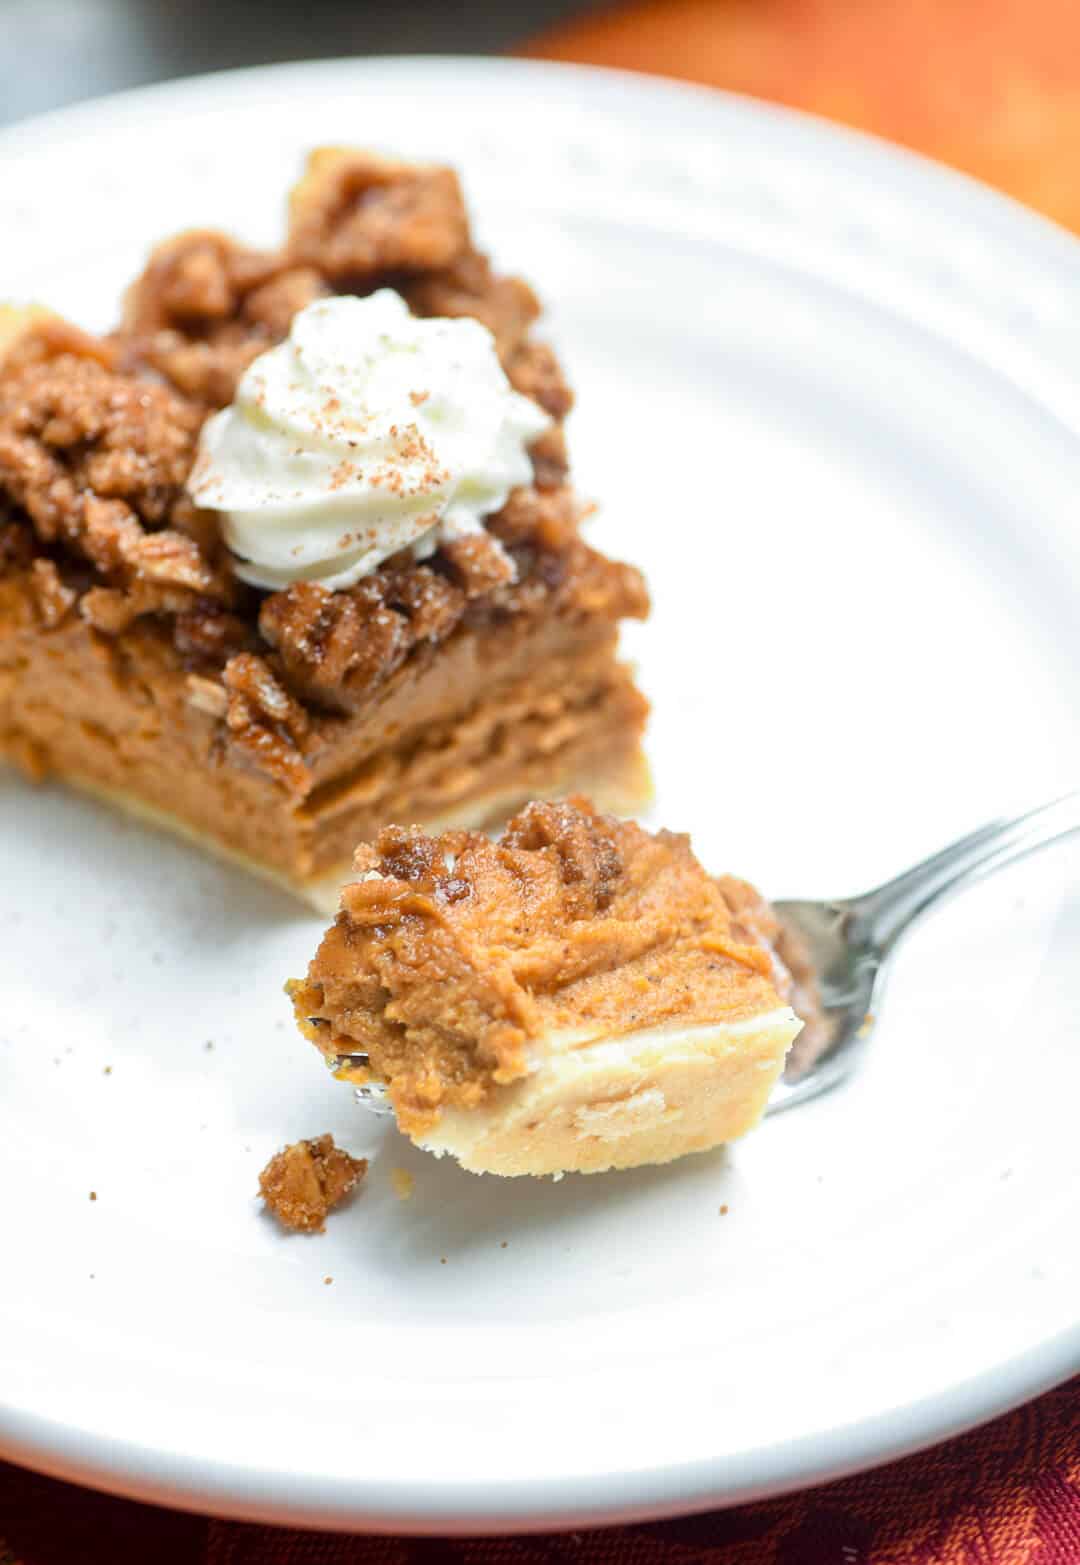 A richly spiced pumpkin pie topped with a sticky sweet pecan praline and baked to perfection. This Praline Pumpkin Pie is a delicious twist on the classic!